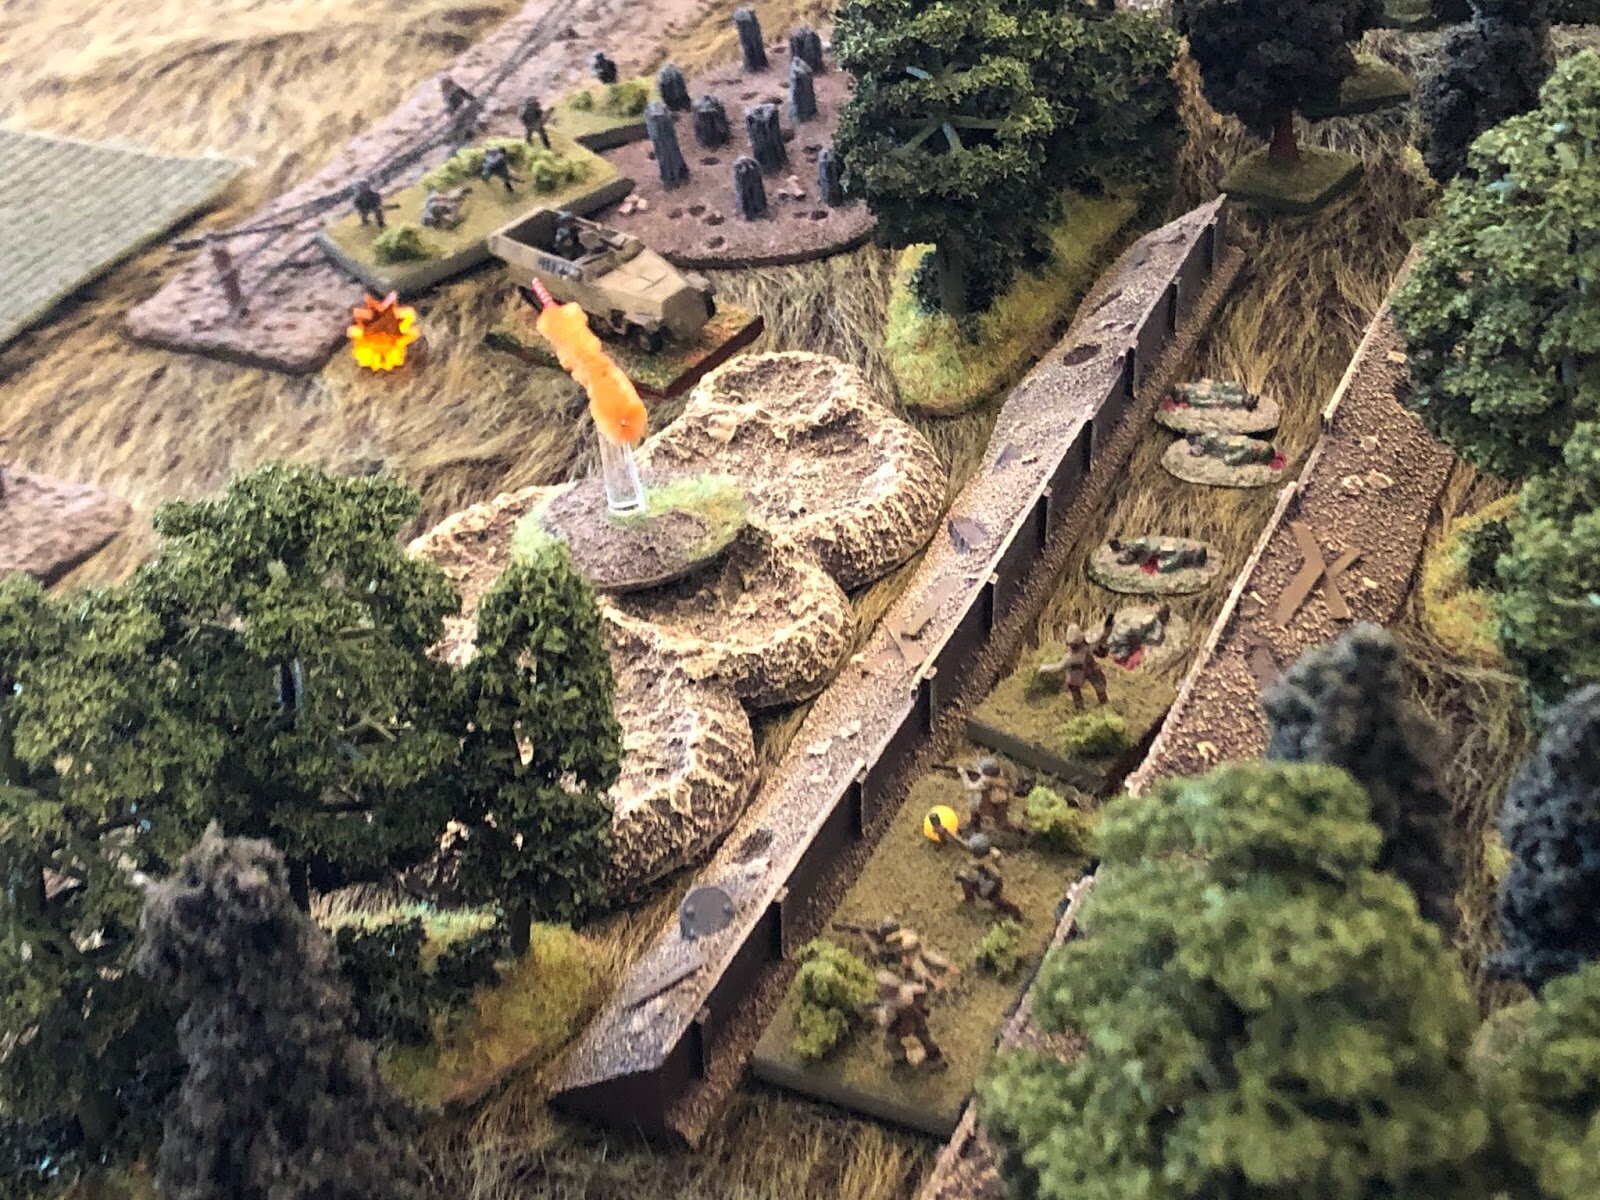  Back at the southwest woods, the Soviet Platoon Commander seriously contemplates close assaulting the German half-tracks and suppressed PC and squad. But he looks at his poor, conscripted boys and decides that it’s probably too much for them, so he 